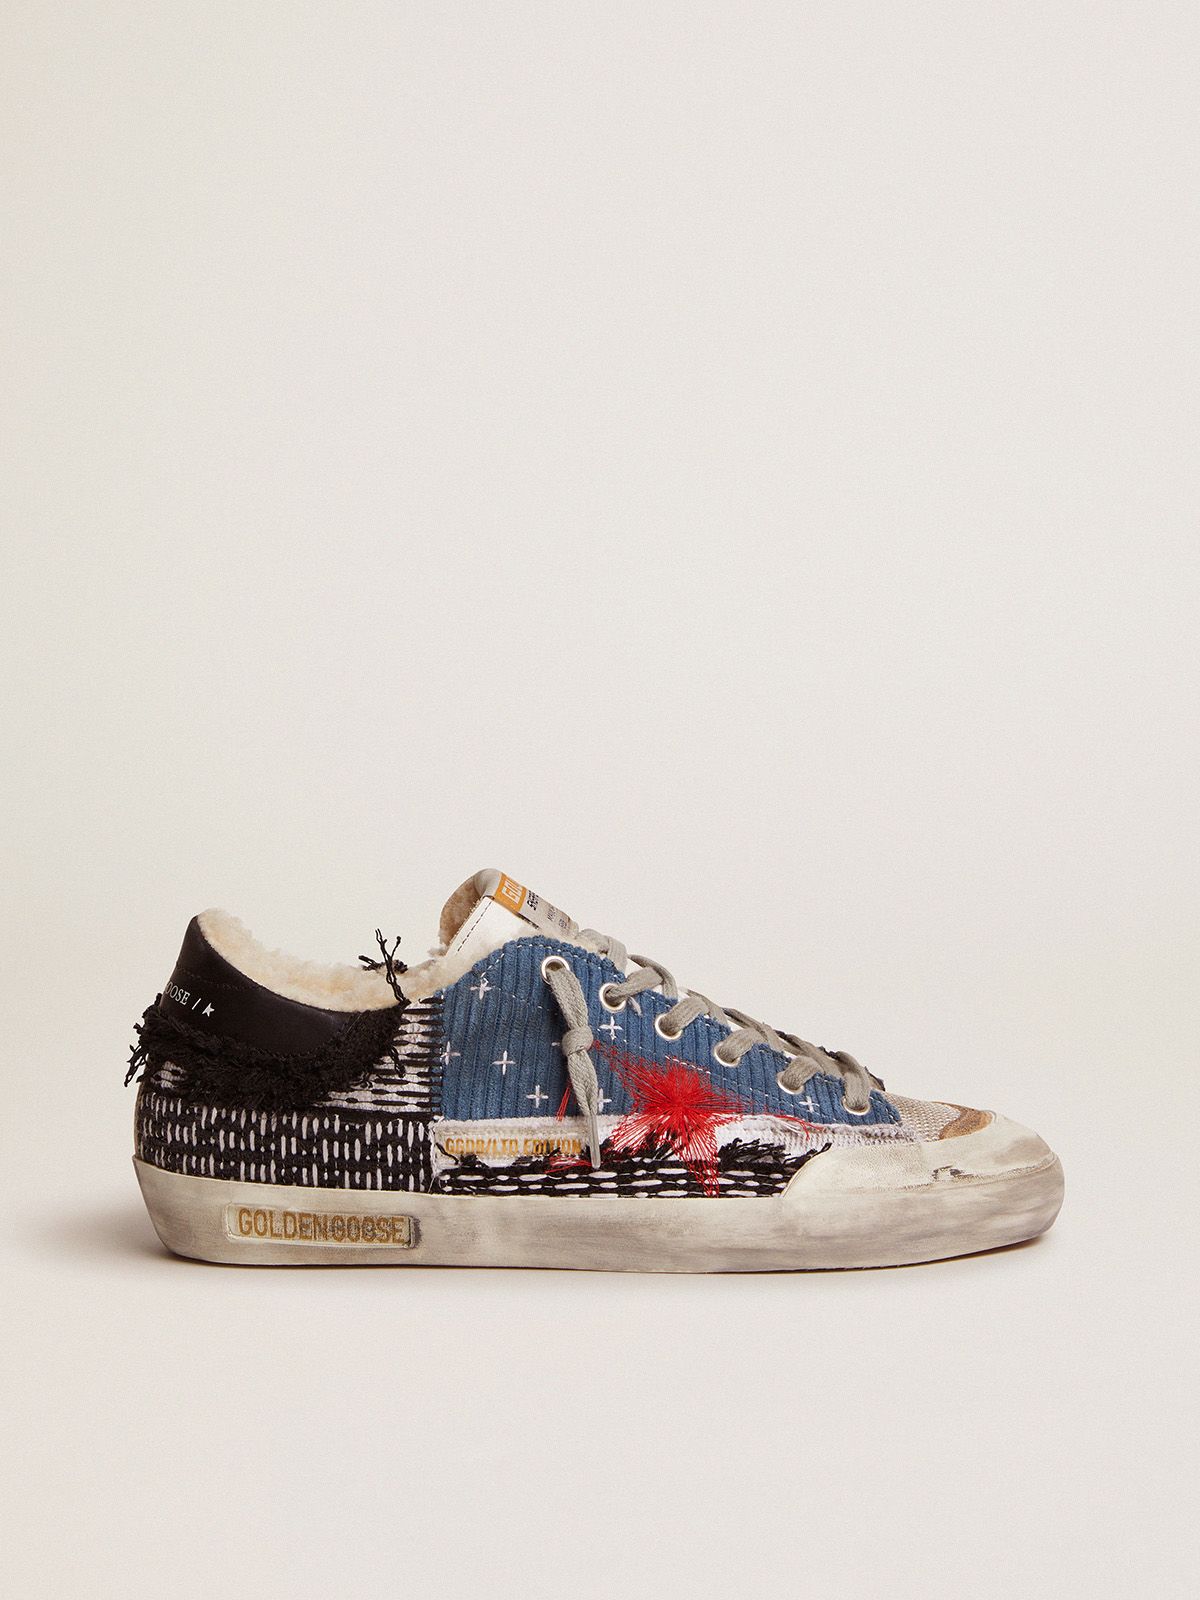 golden goose with velvet Penstar patchwork sneakers shearling lining LAB Super-Star and canvas